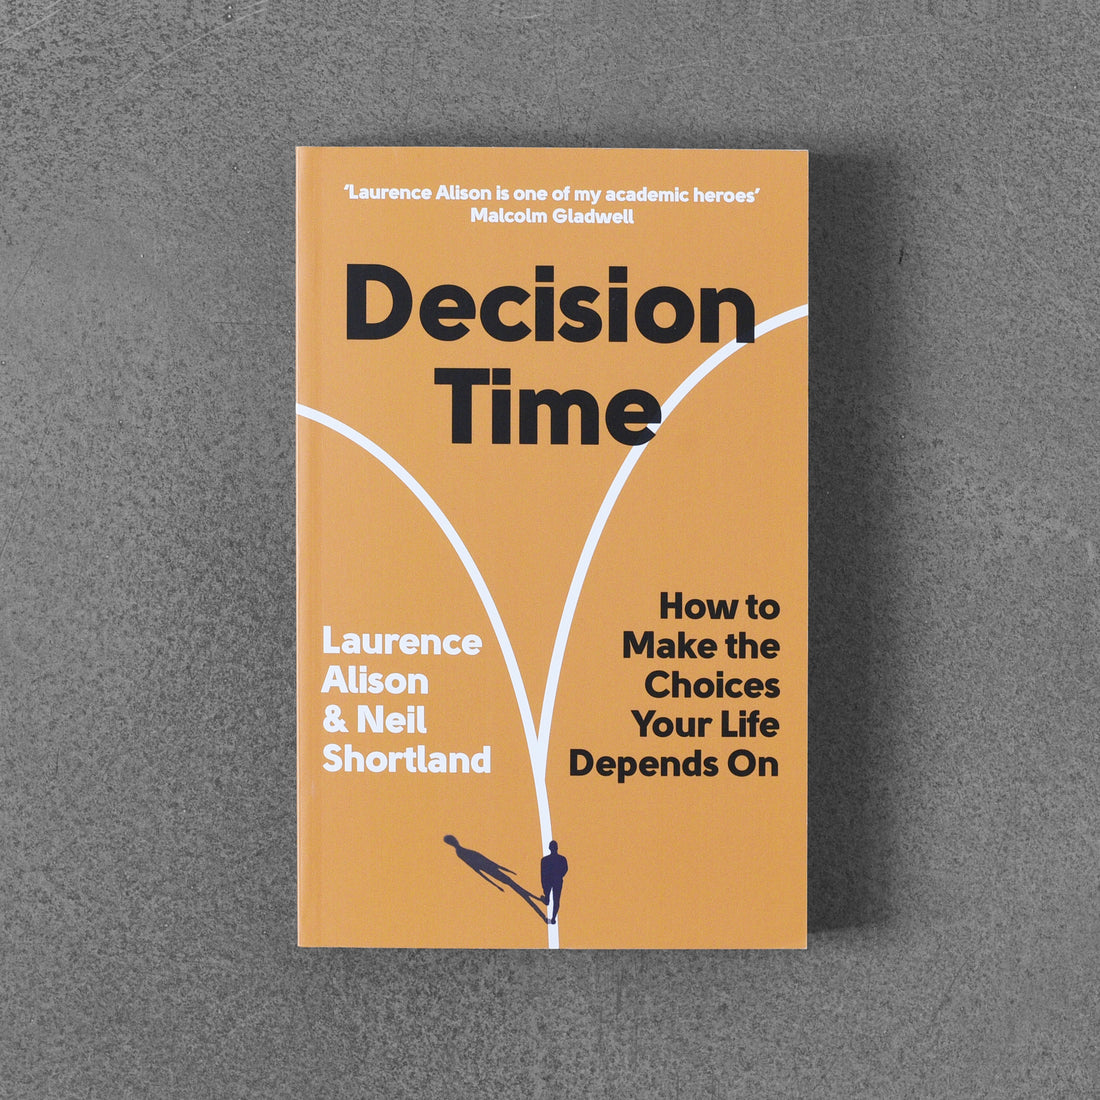 Decision Time: How to Make the Choices Your Life Depends